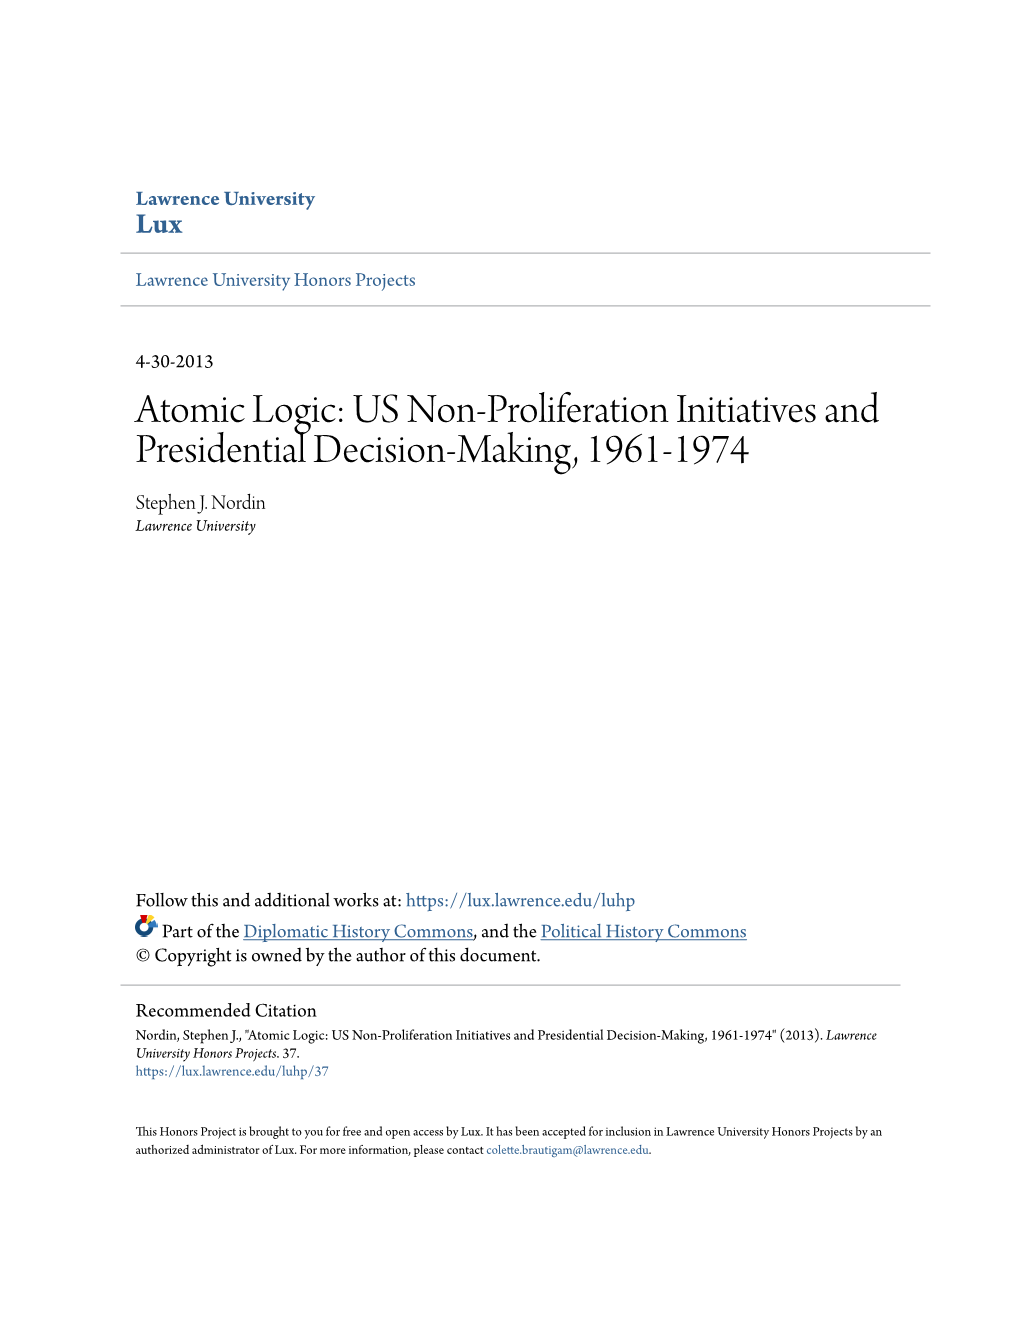 US Non-Proliferation Initiatives and Presidential Decision-Making, 1961-1974 Stephen J